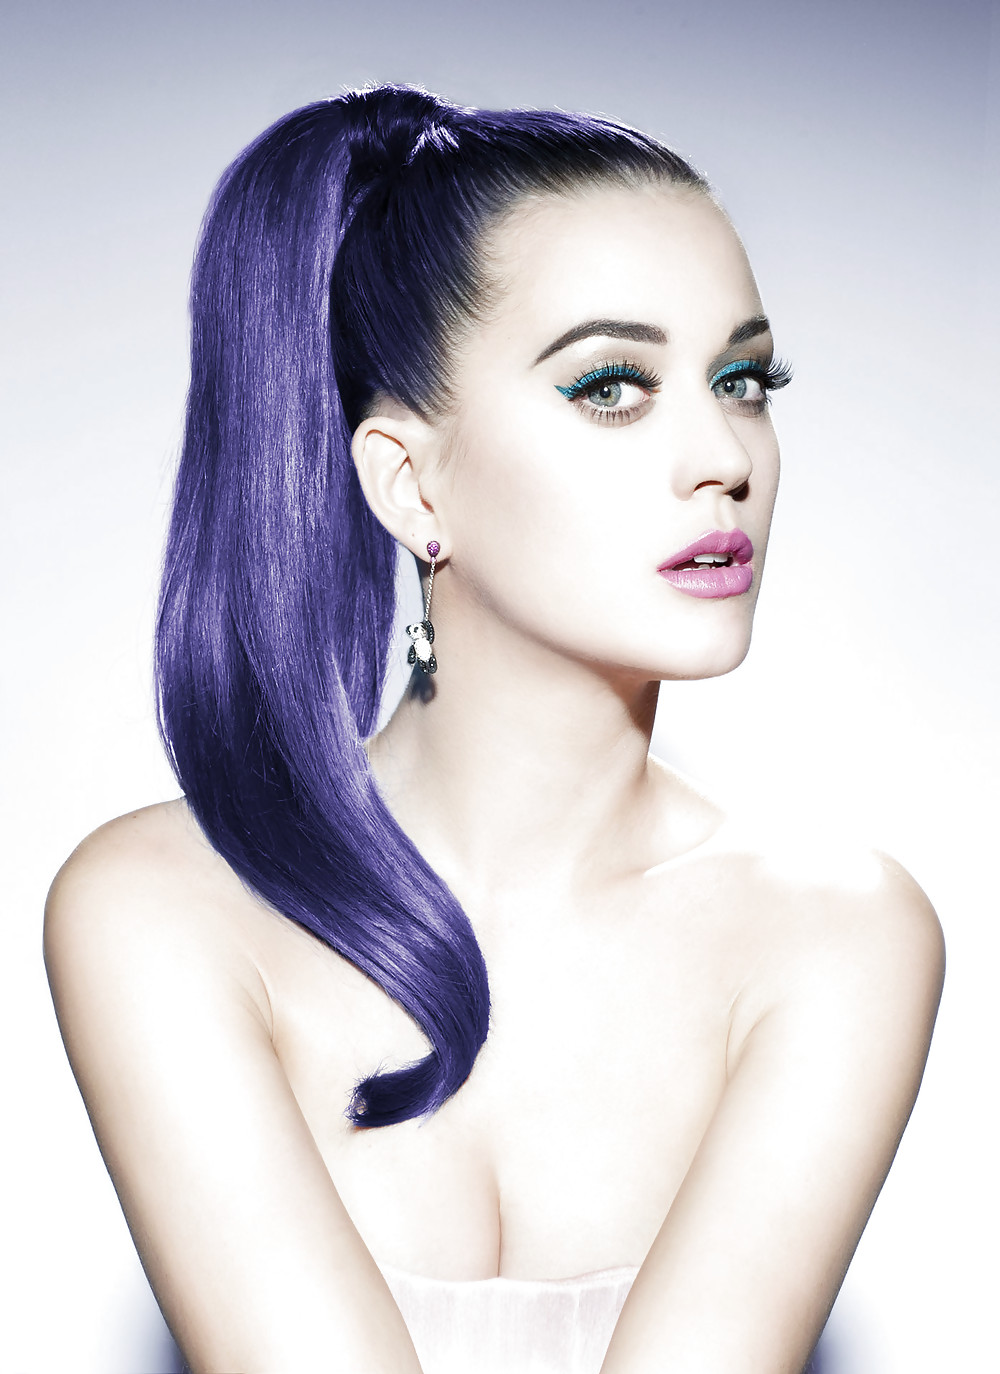 Katy Perry 1 (lordlone) #21288834